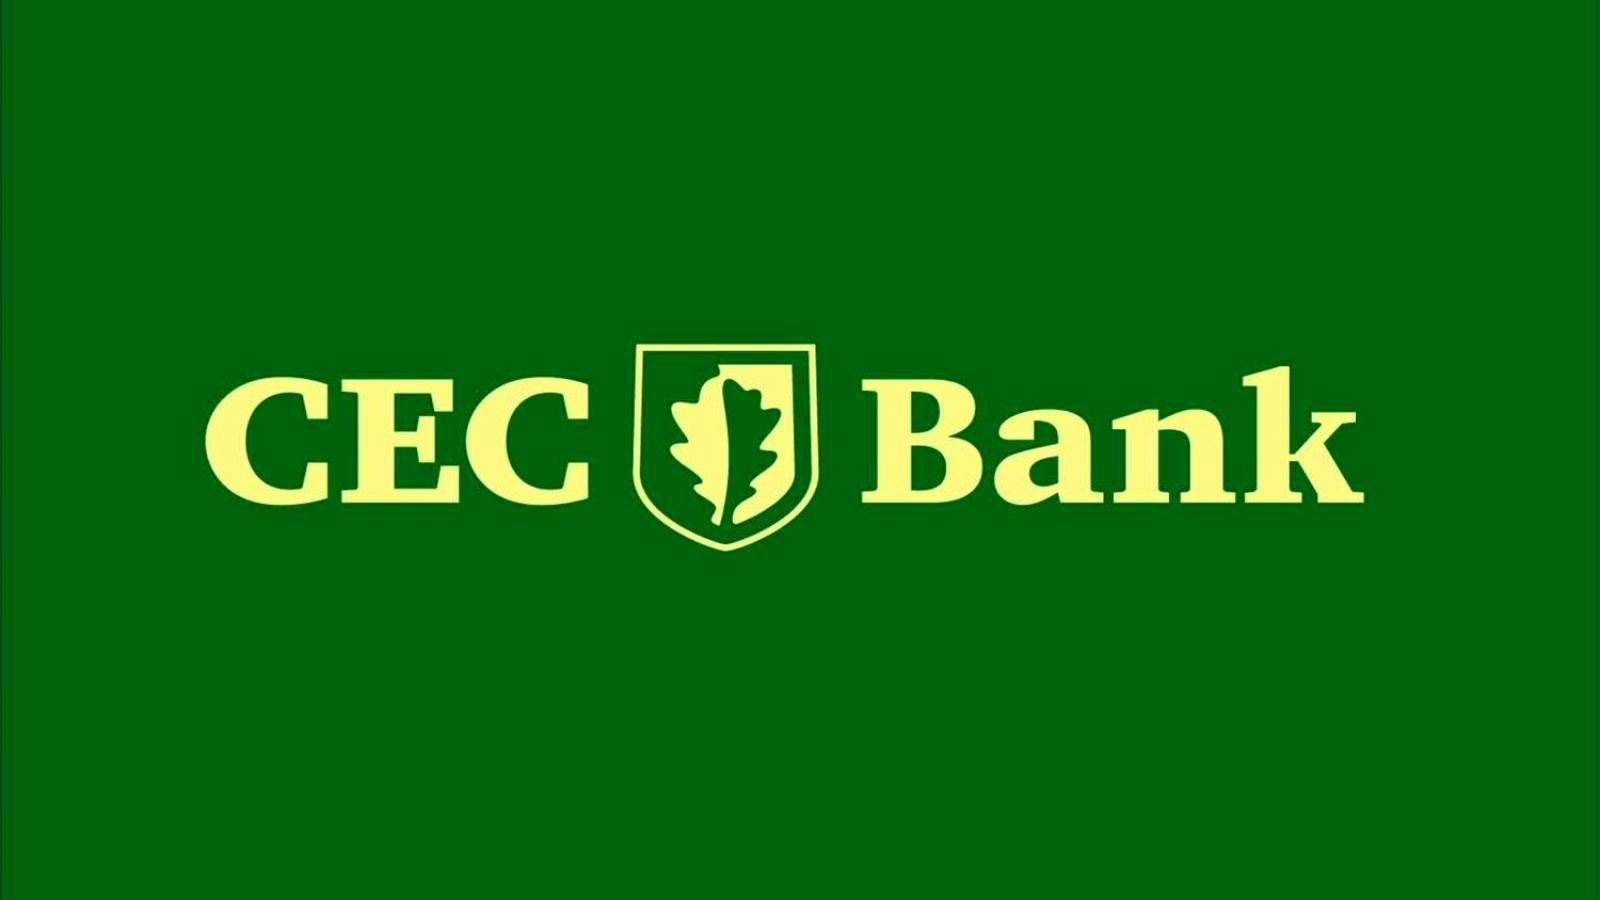 CEC Bank IMPORTANT Information WARNING Issued to Romanian Customers